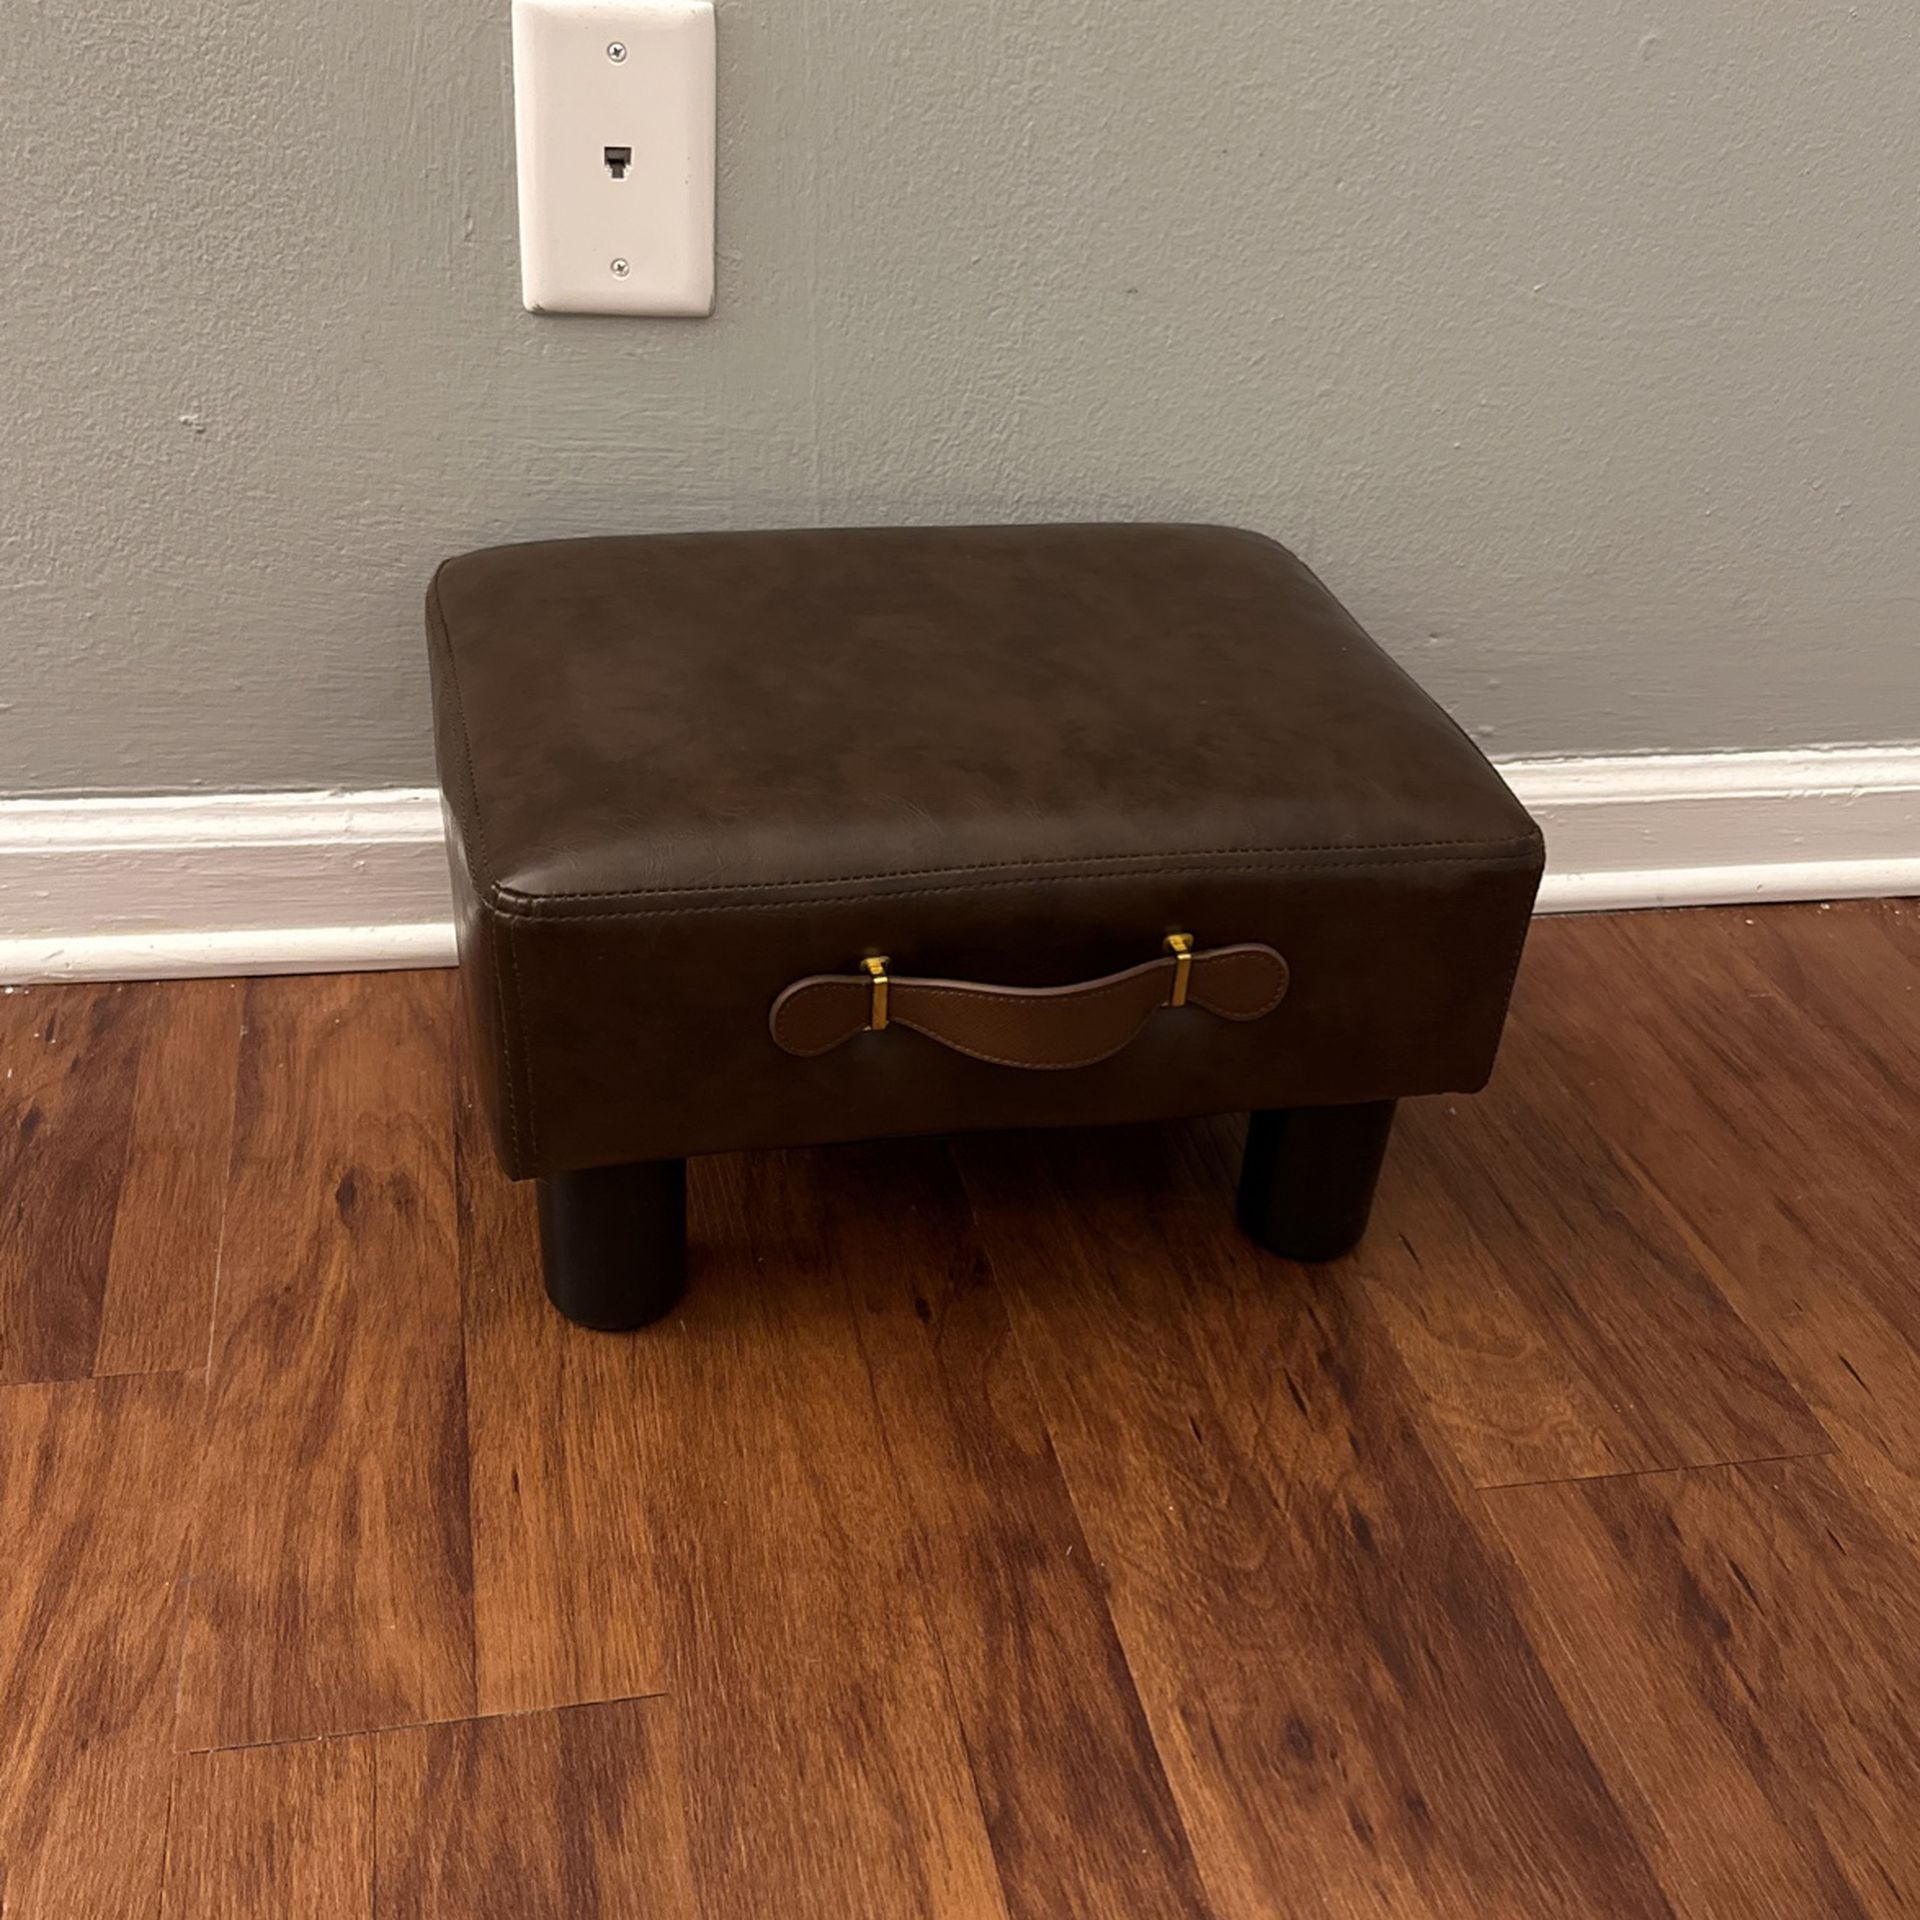  Small Foot Stool with Handle, Brown Faux Leather Short Foot  Stool Rest, Rectangle Storage Foot Stools Ottoman with Plastic Legs, Padded Footstool  Small Step Stool for Living Room, Office, Desk, Patio 